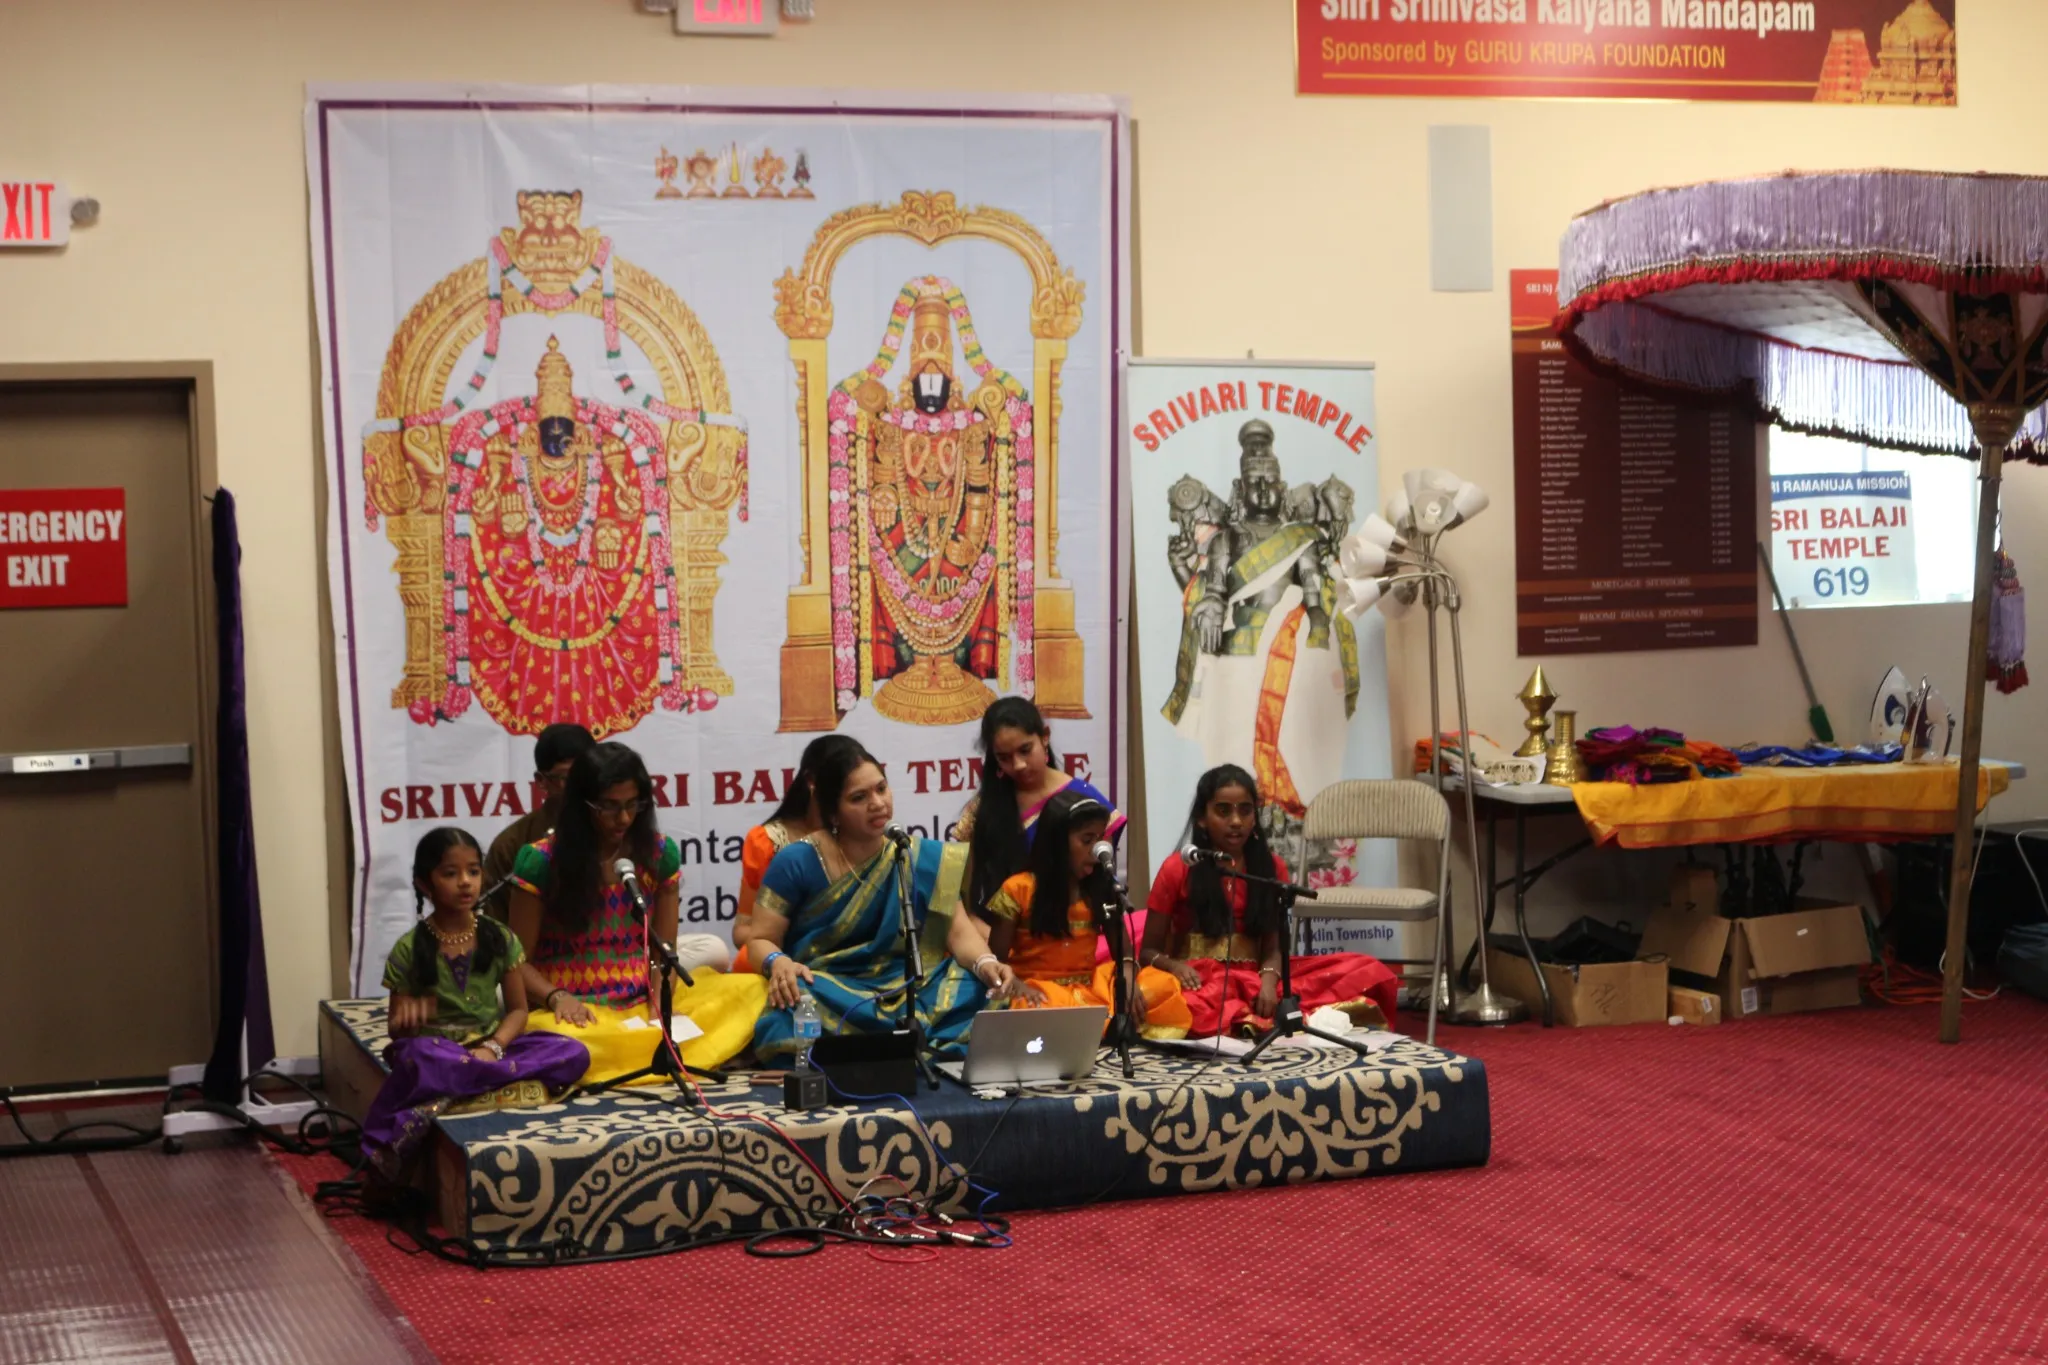 Ramanujar temple, 1000-year celebration, cultural event, Hindu music performance, traditional Indian attire, religious celebration, temple festival, Indian traditions, devotional recital, community gathering, Hindu deities, temple banner